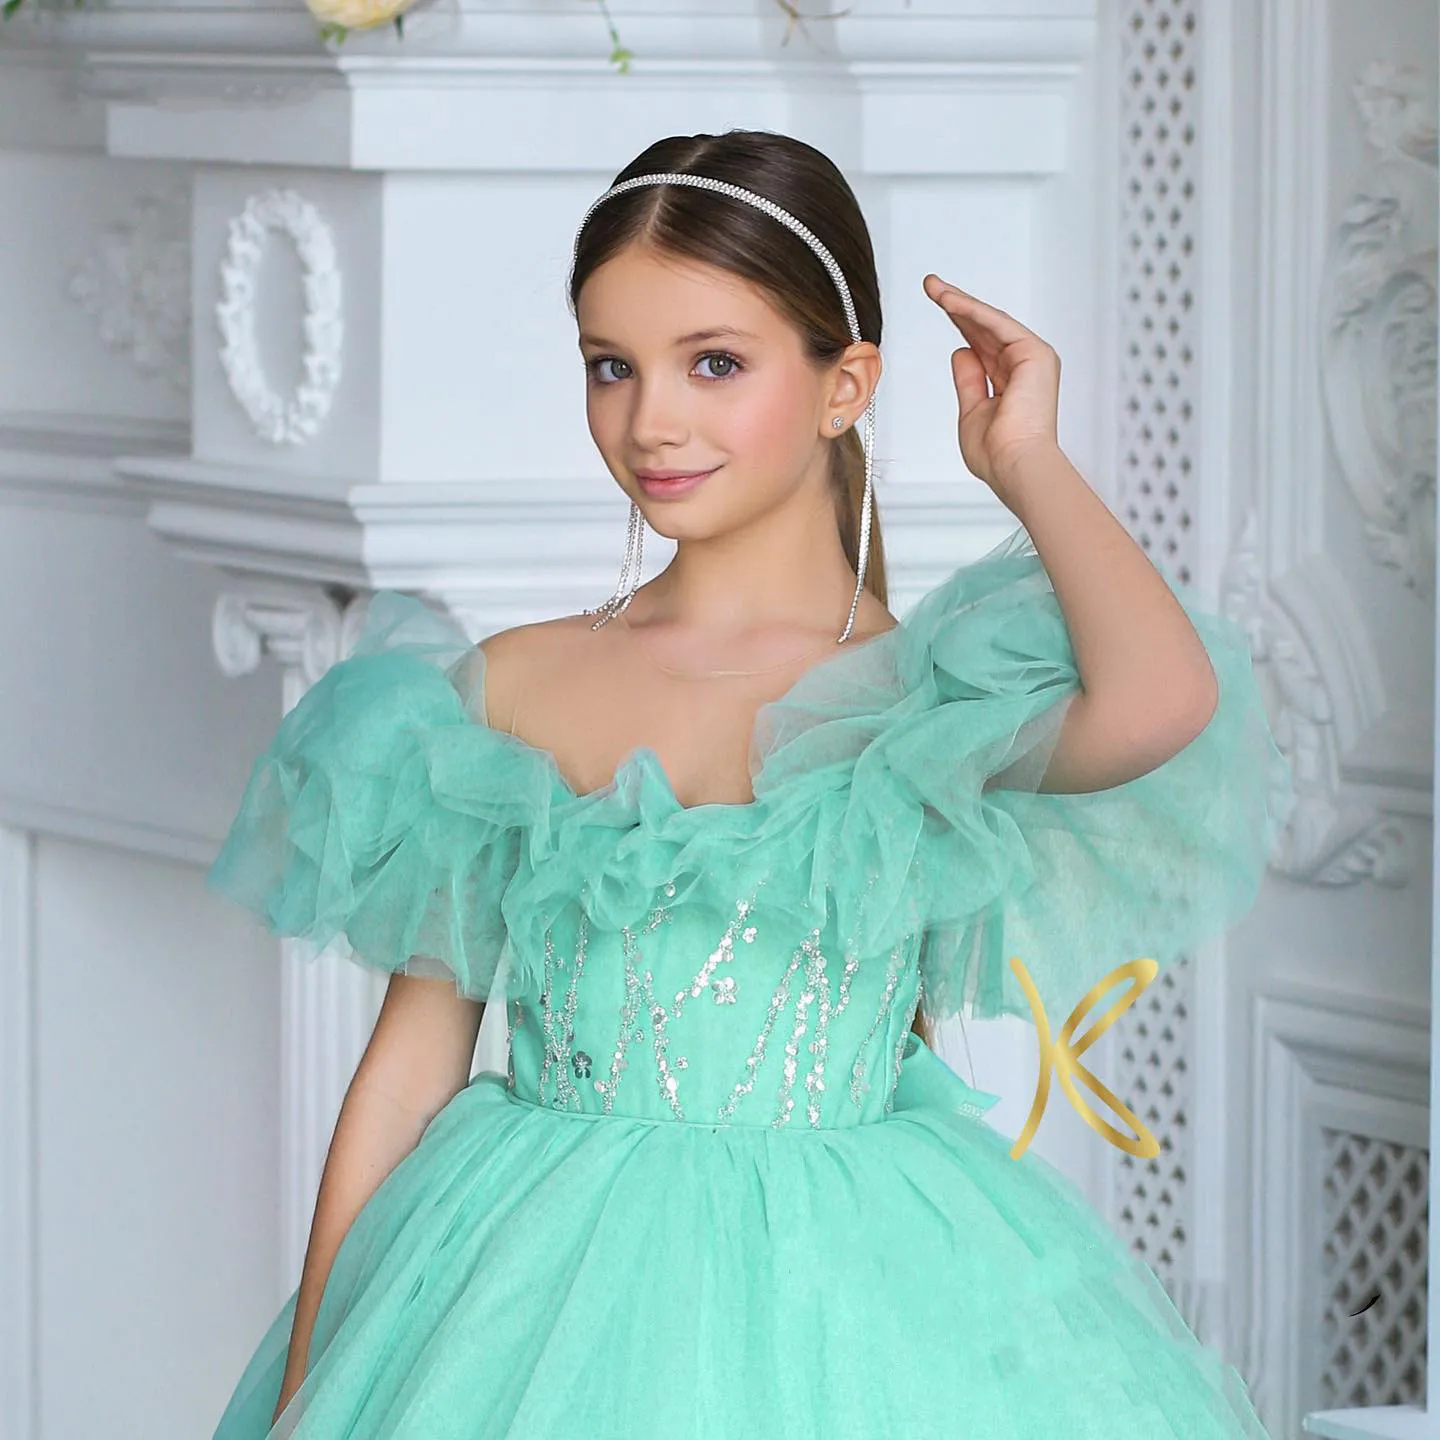 

Aqua Tulle Child Party Beaded Puffy Flower Girl Dresses Tea Length Ruffles Pageant Wedding Prom First Communion Ball Gowns